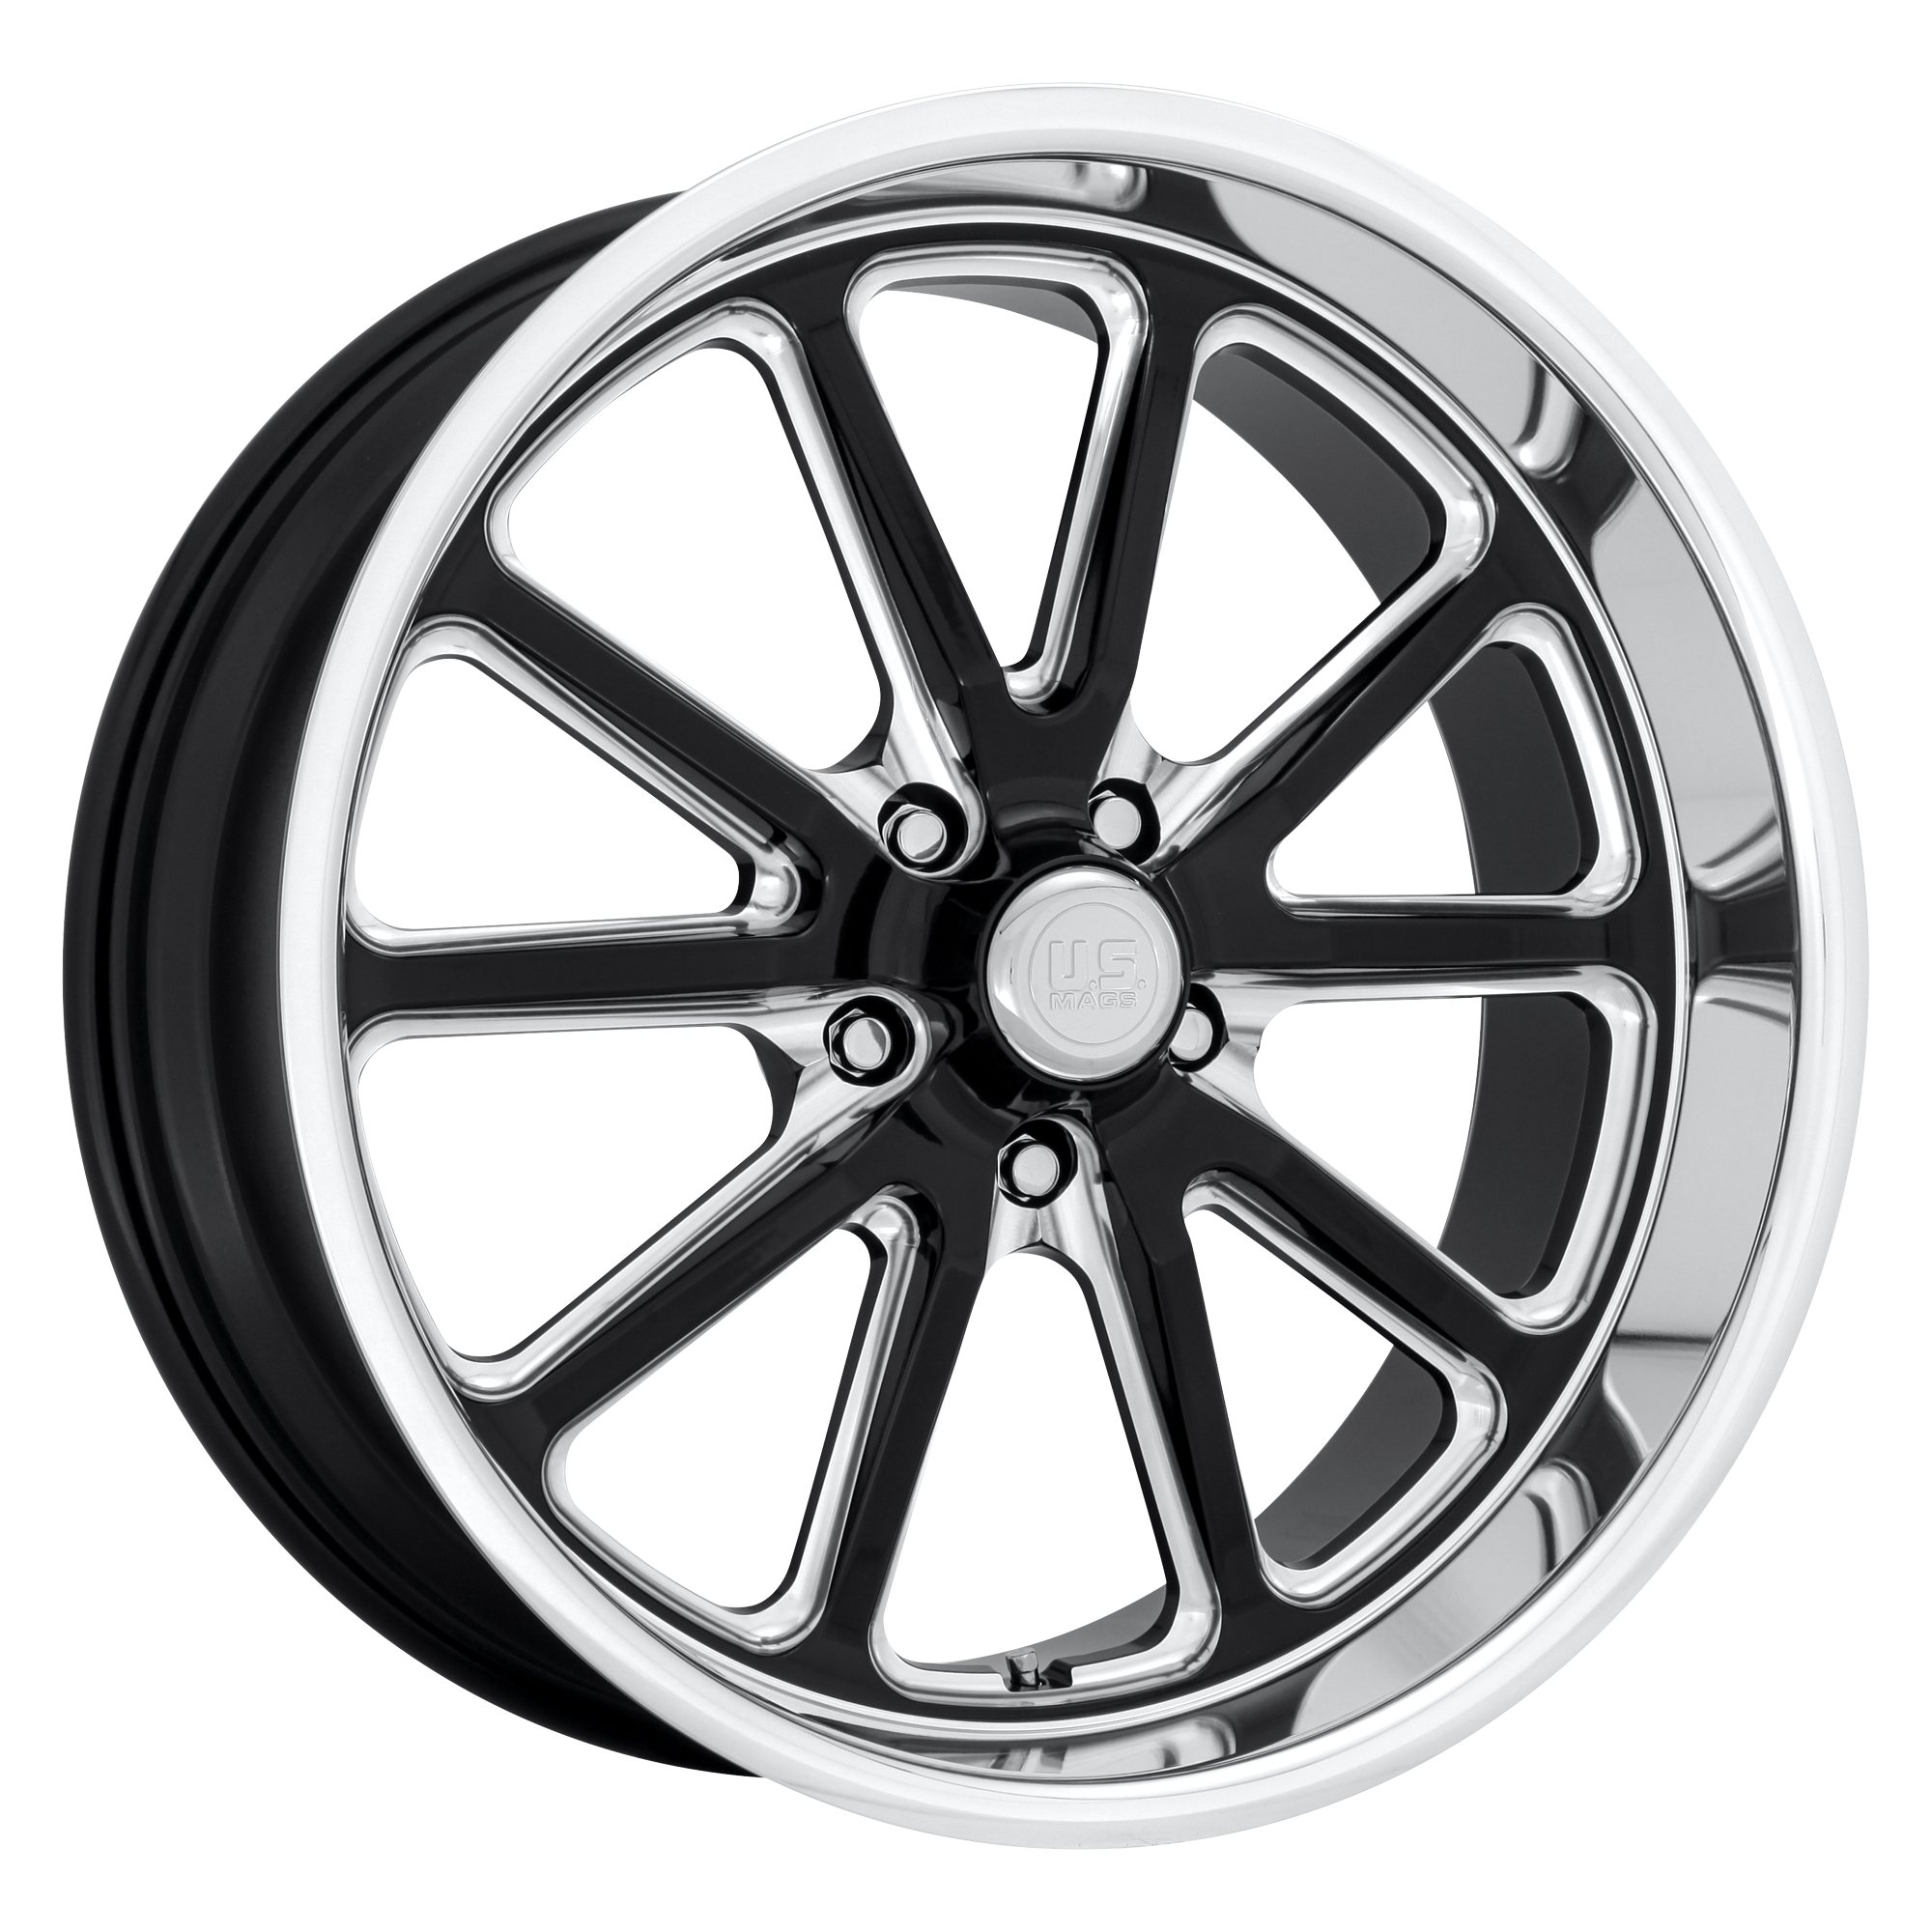 RAMBLER 18x8 5x127.00 GLOSS BLACK MILLED (1 mm) - Tires and Engine Performance